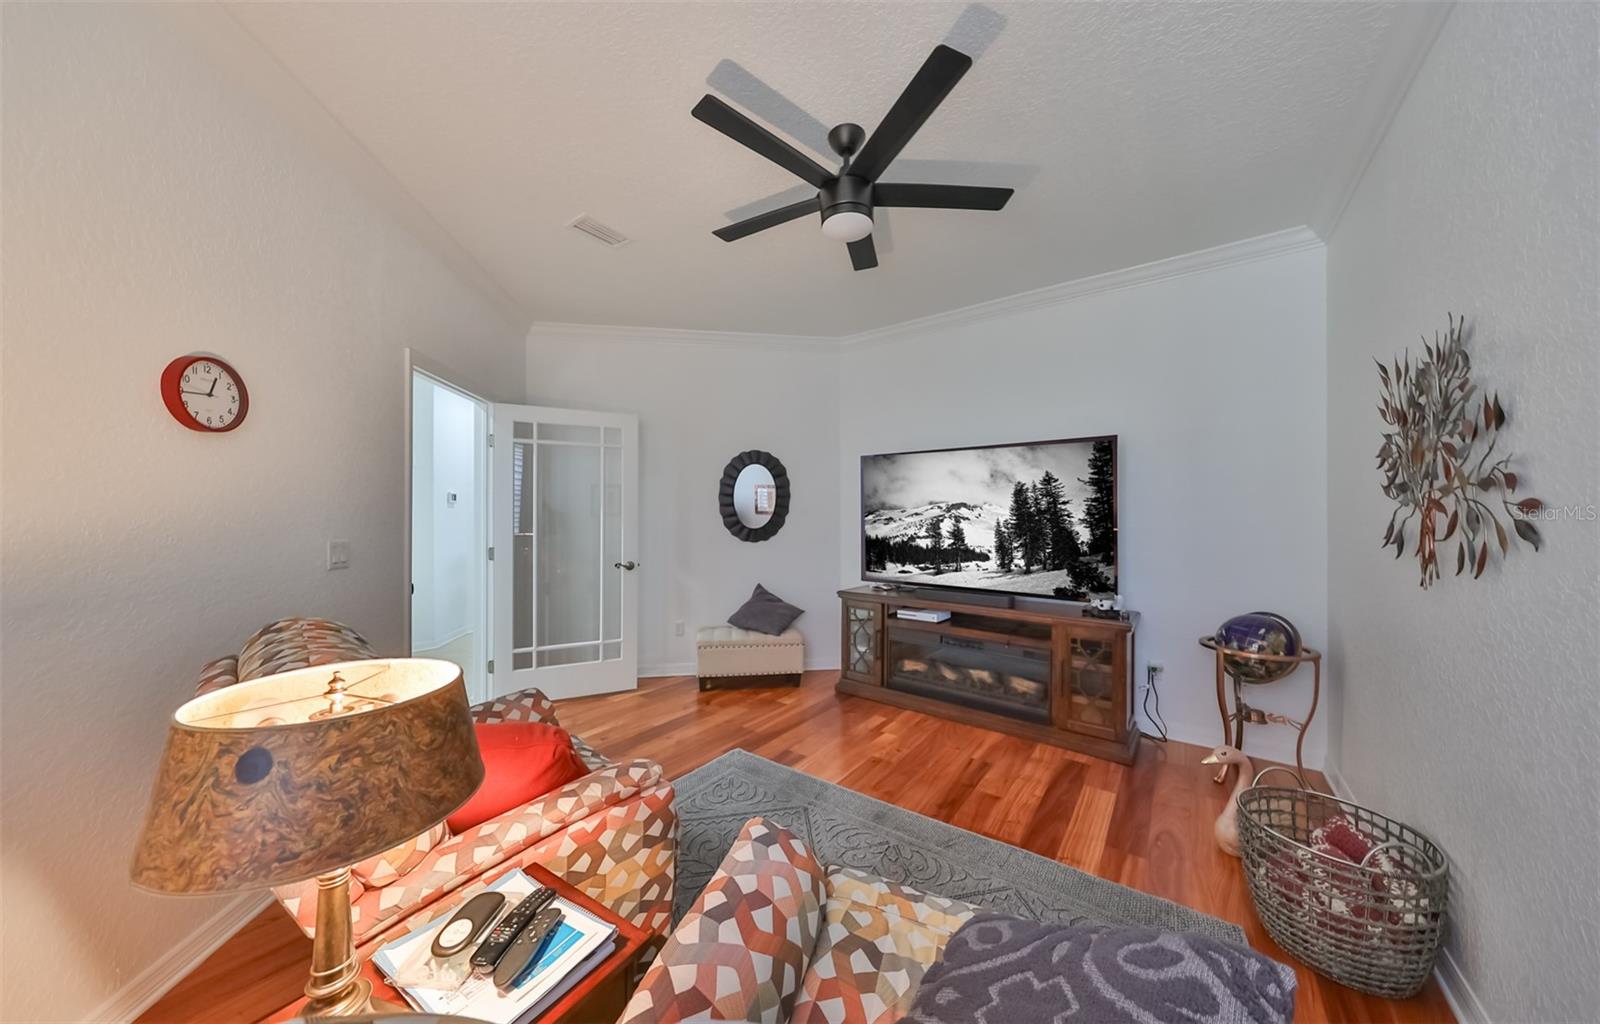 Den can be transformed into a movie, game, or card room! Entertain yourself or others in this large open area.  The glass door, wood floors and custom ceiling fan only add interest and elegance to the room.